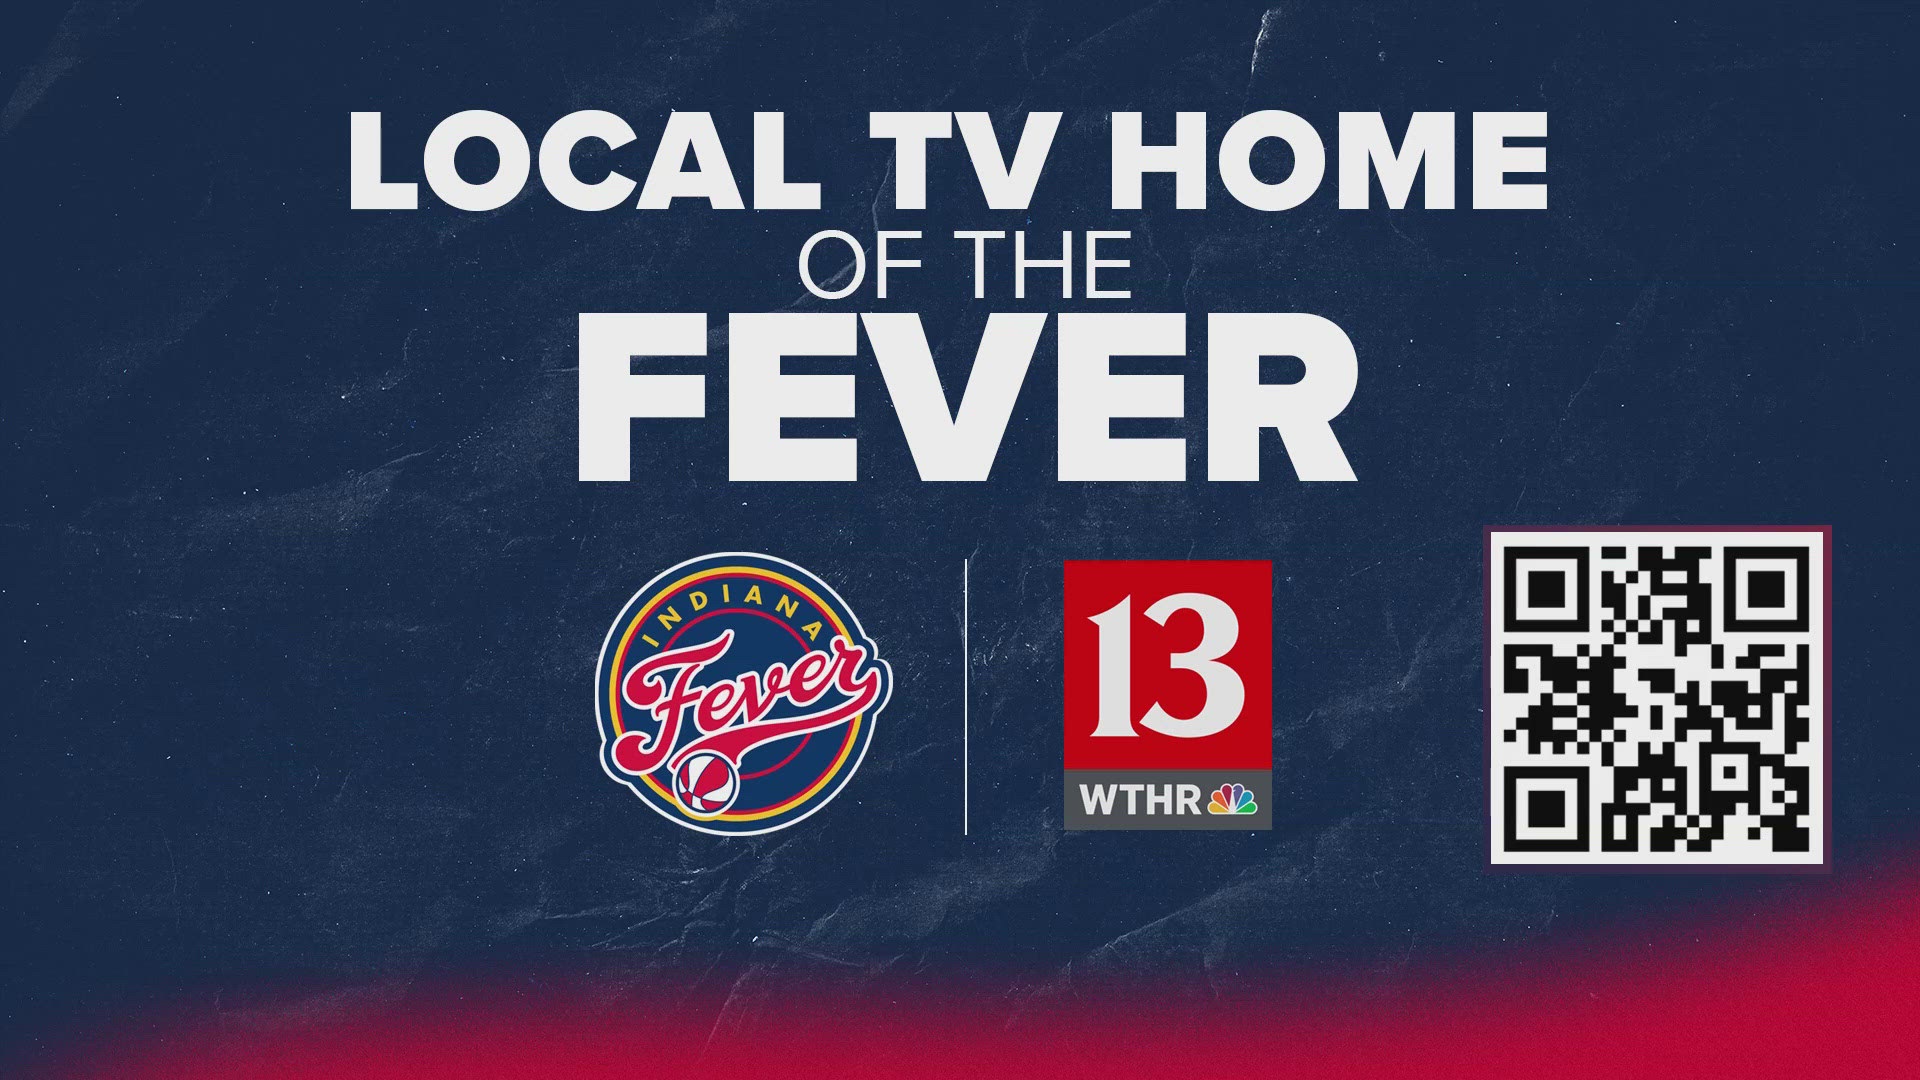 Watch 17 Fever games exclusively on WTHR and WALV!